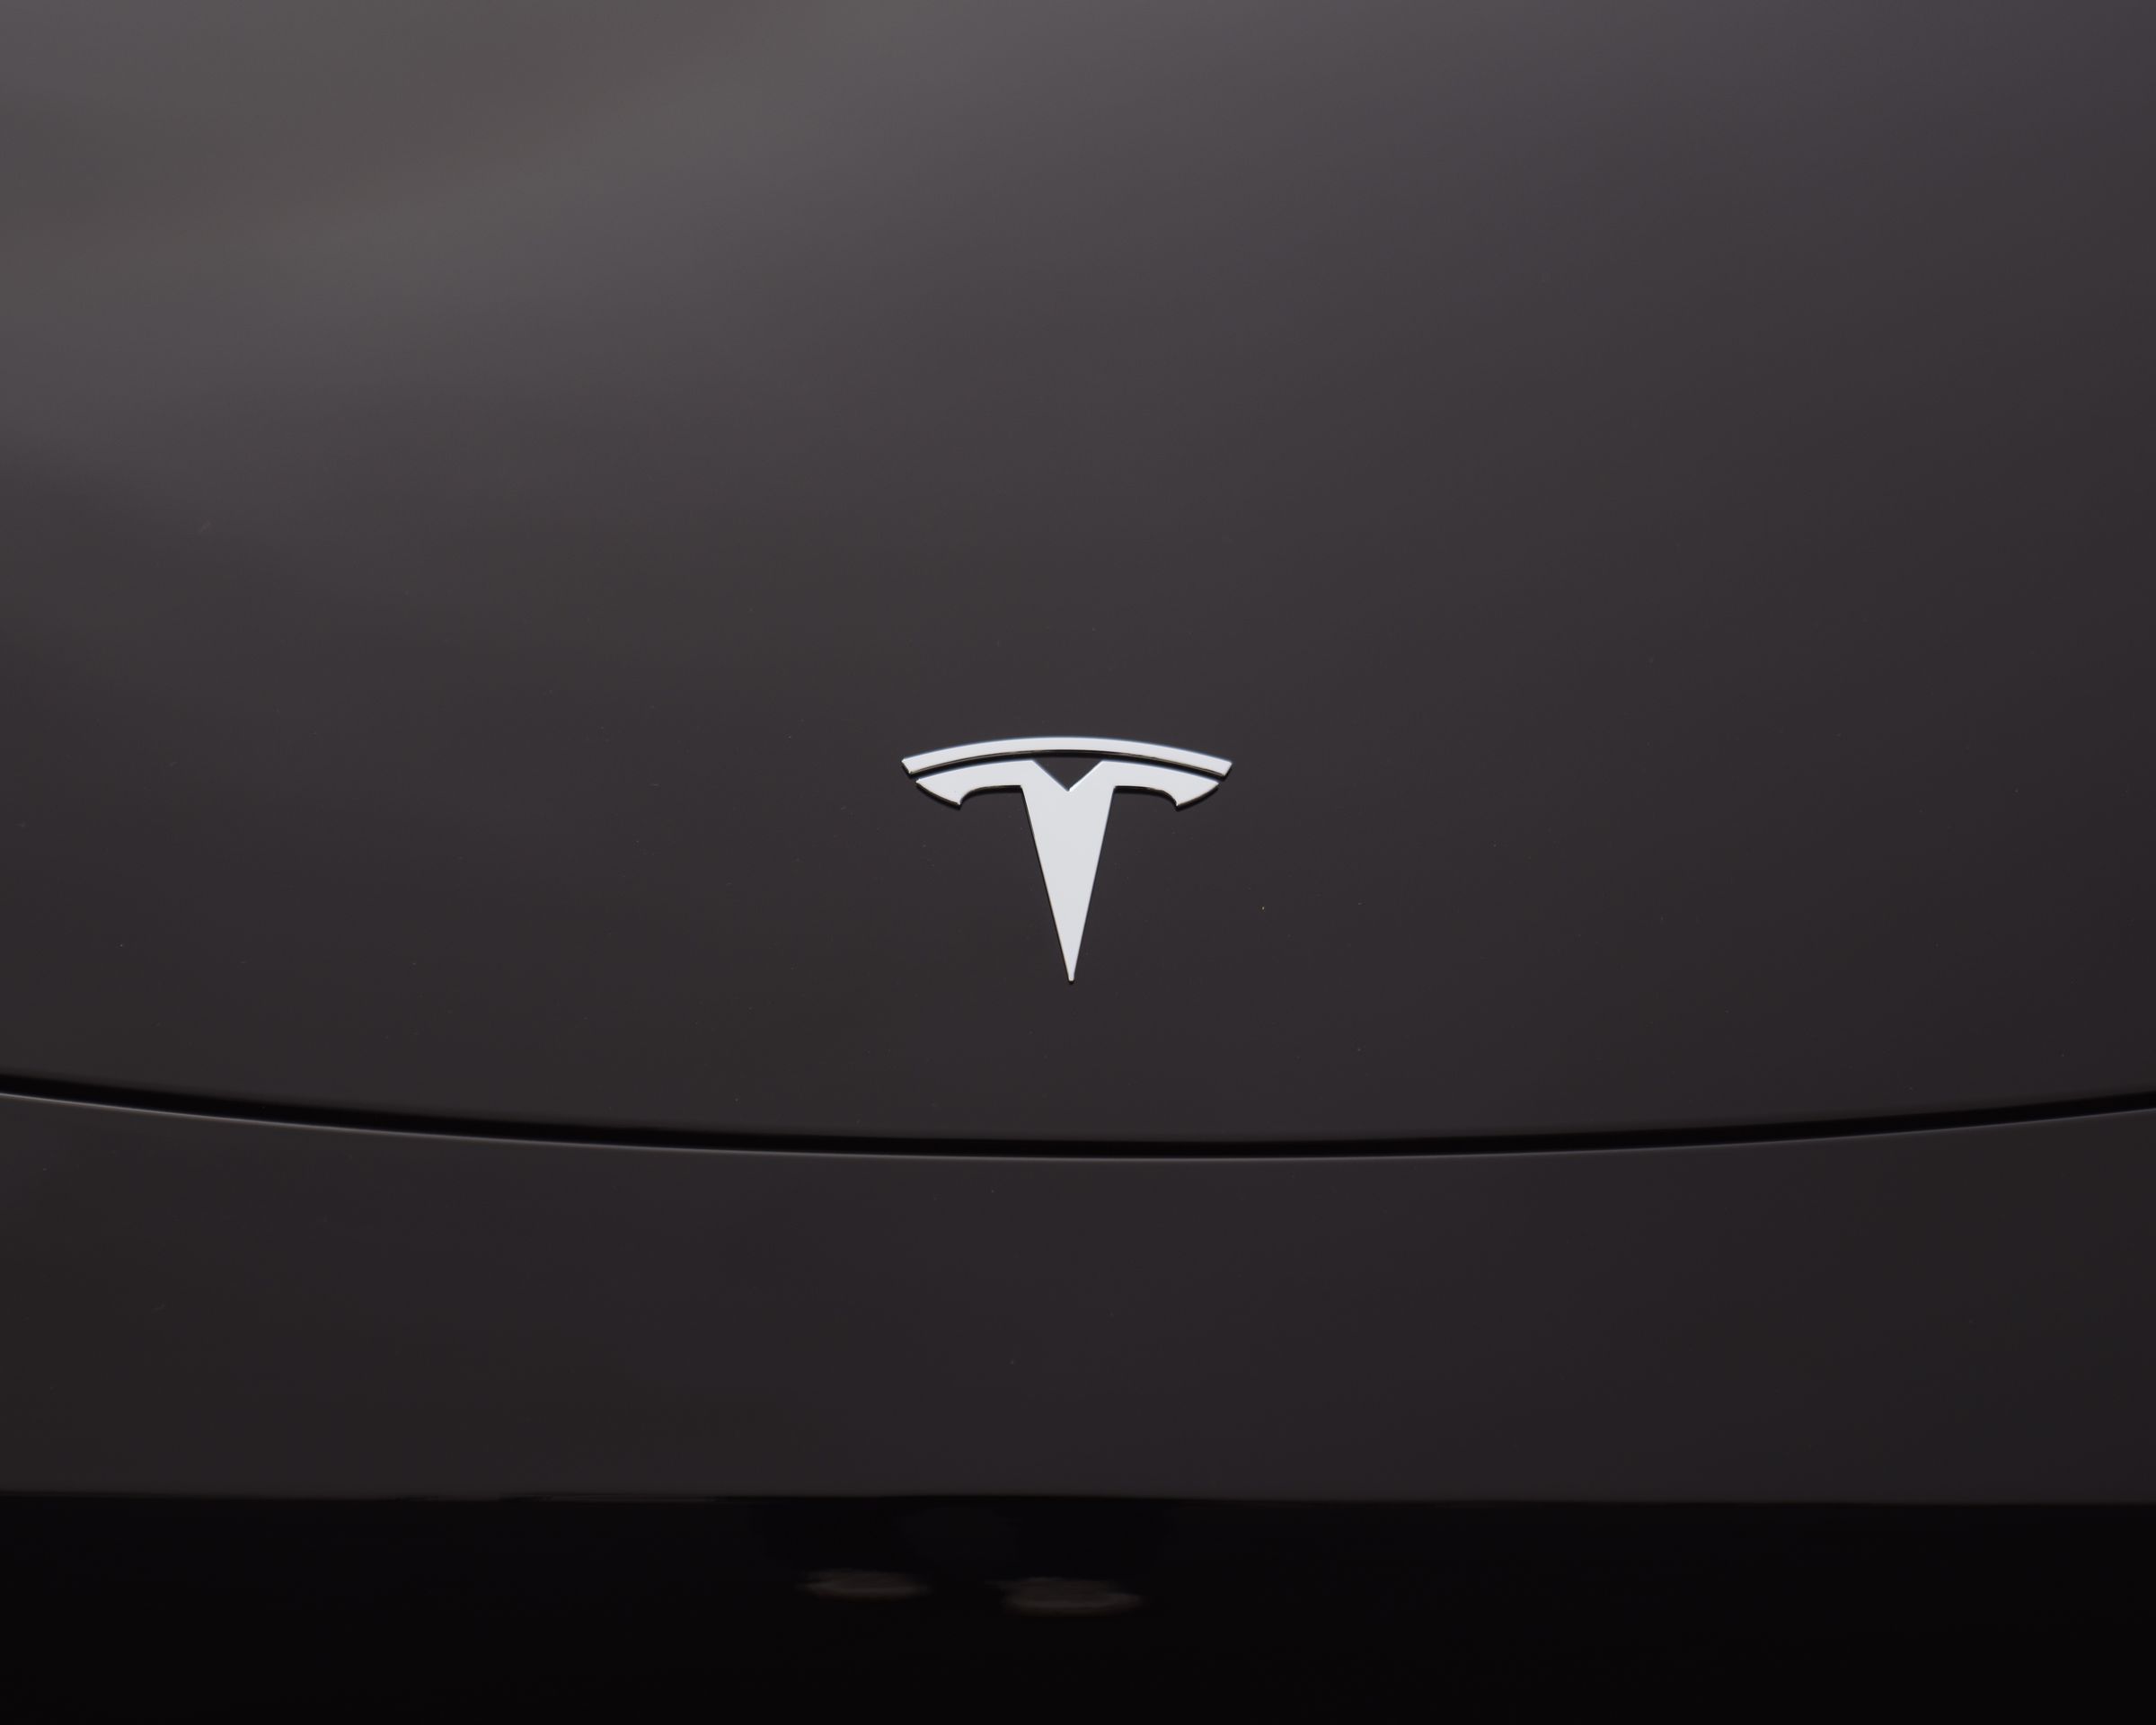 An image showing the Tesla logo on a black vehicle